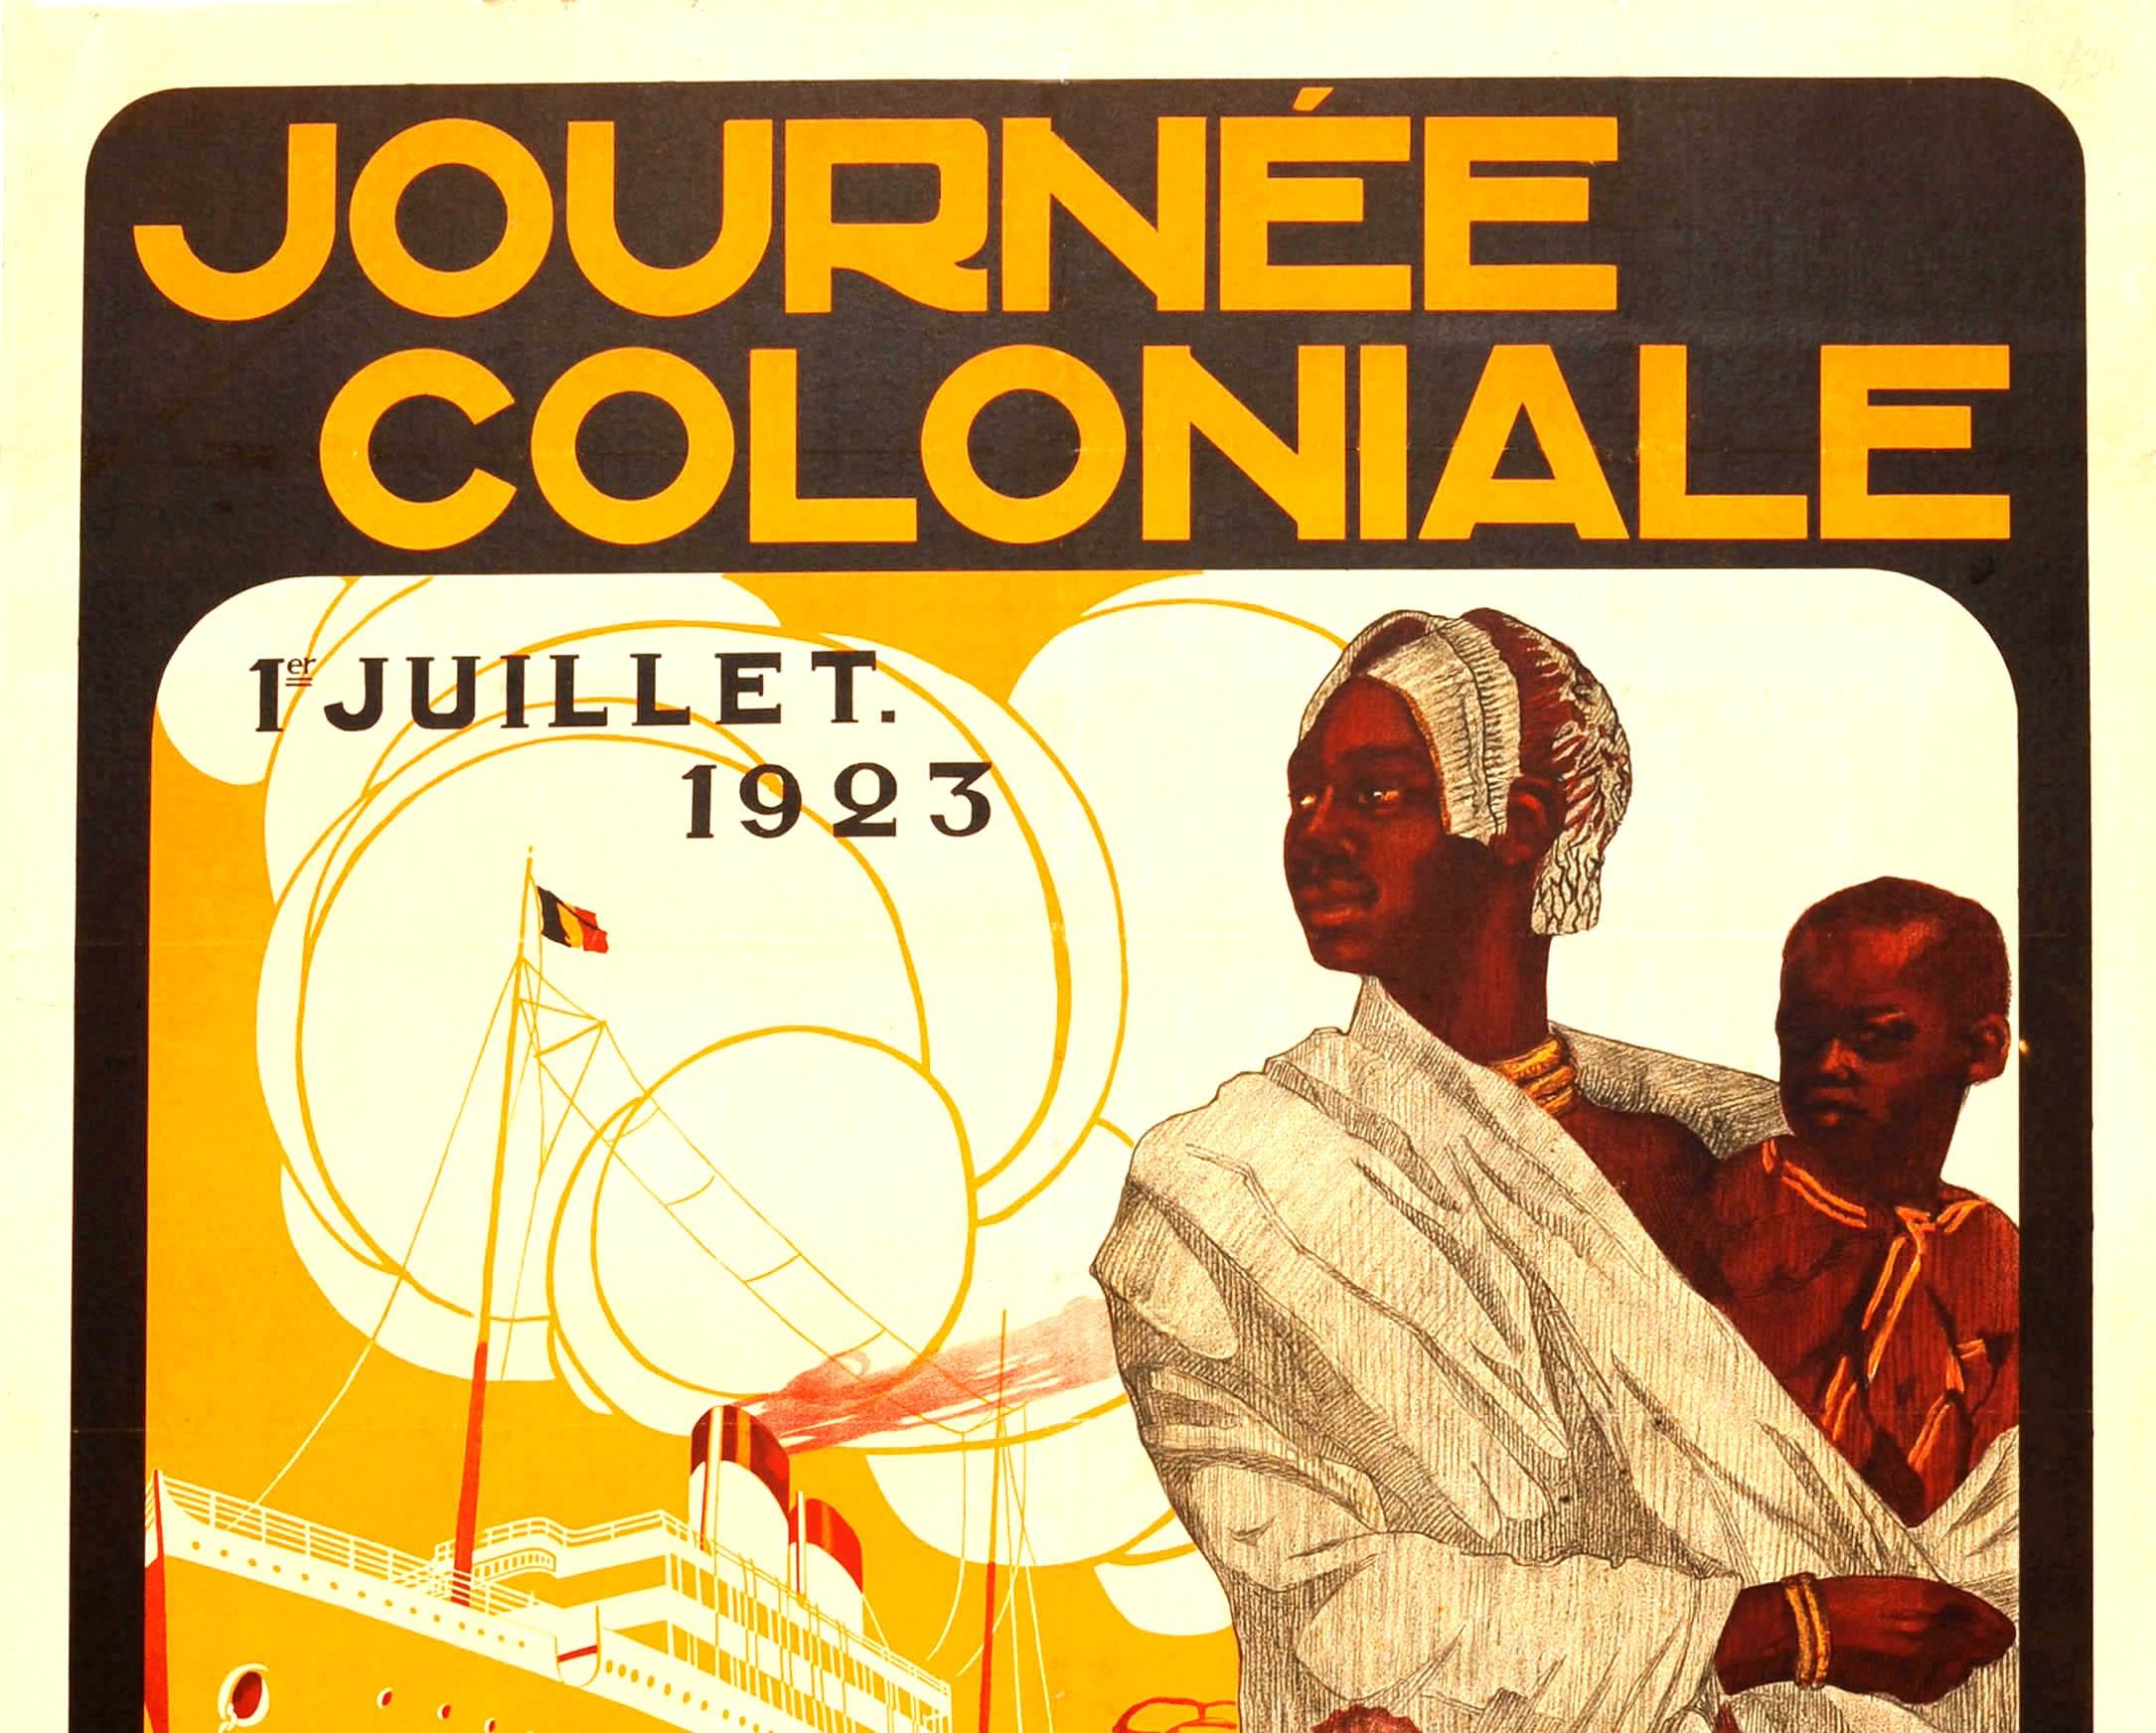 Original vintage poster for the Journee Coloniale 1 Juillet 1923 / Colonial Day 1 July 1923 featuring a great illustration of an African mother holding her young child with two men sitting beside them and a large steamship by cargo on the dock in